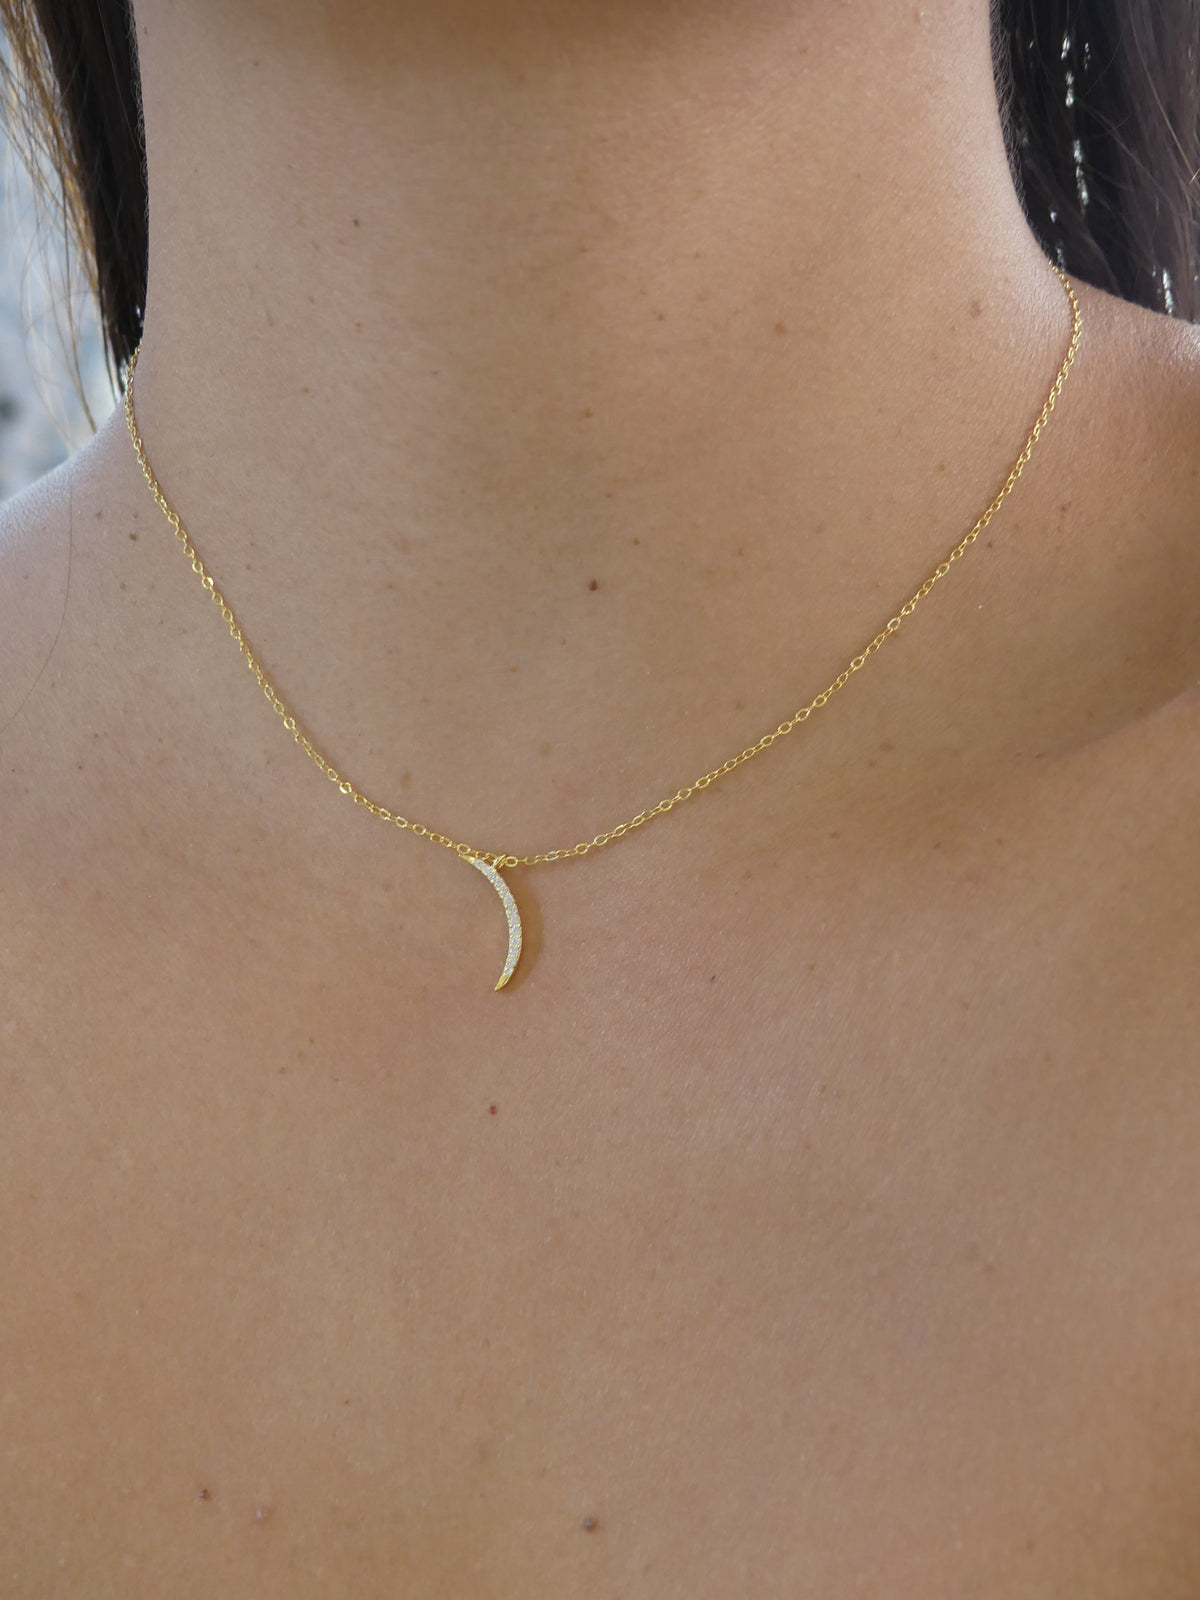 Dainty moon necklace gold plated .925 sterling silver. Kesley Boutique. Gift ideas. Cute, trending necklaces on pinterest. Gift ideas